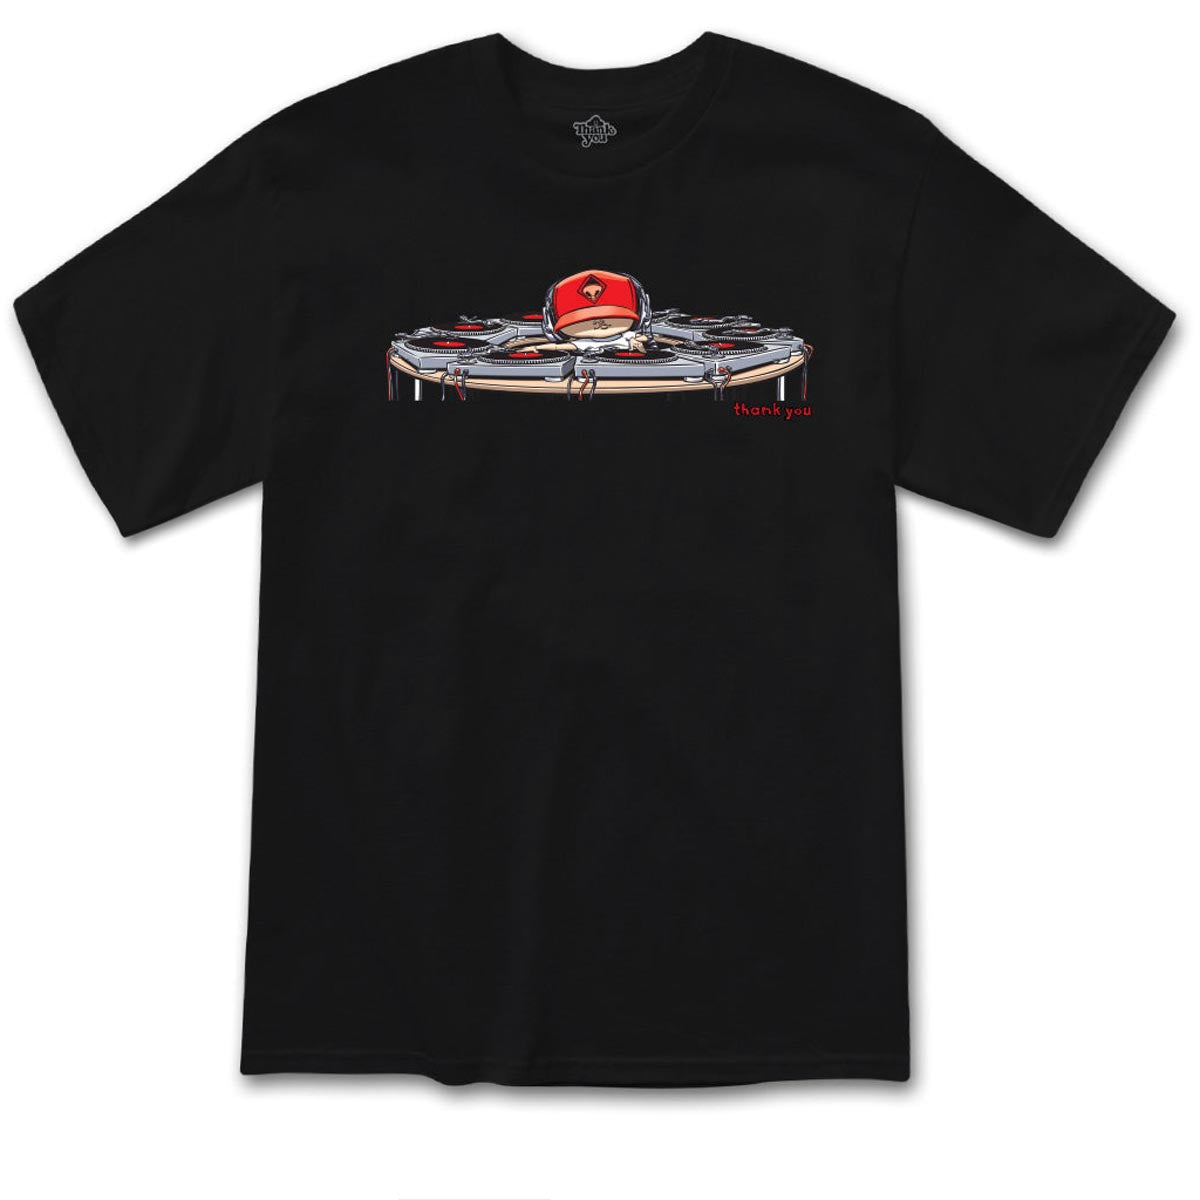 Thank You x Ronnie Creager Mix Master T-Shirt - Black image 1